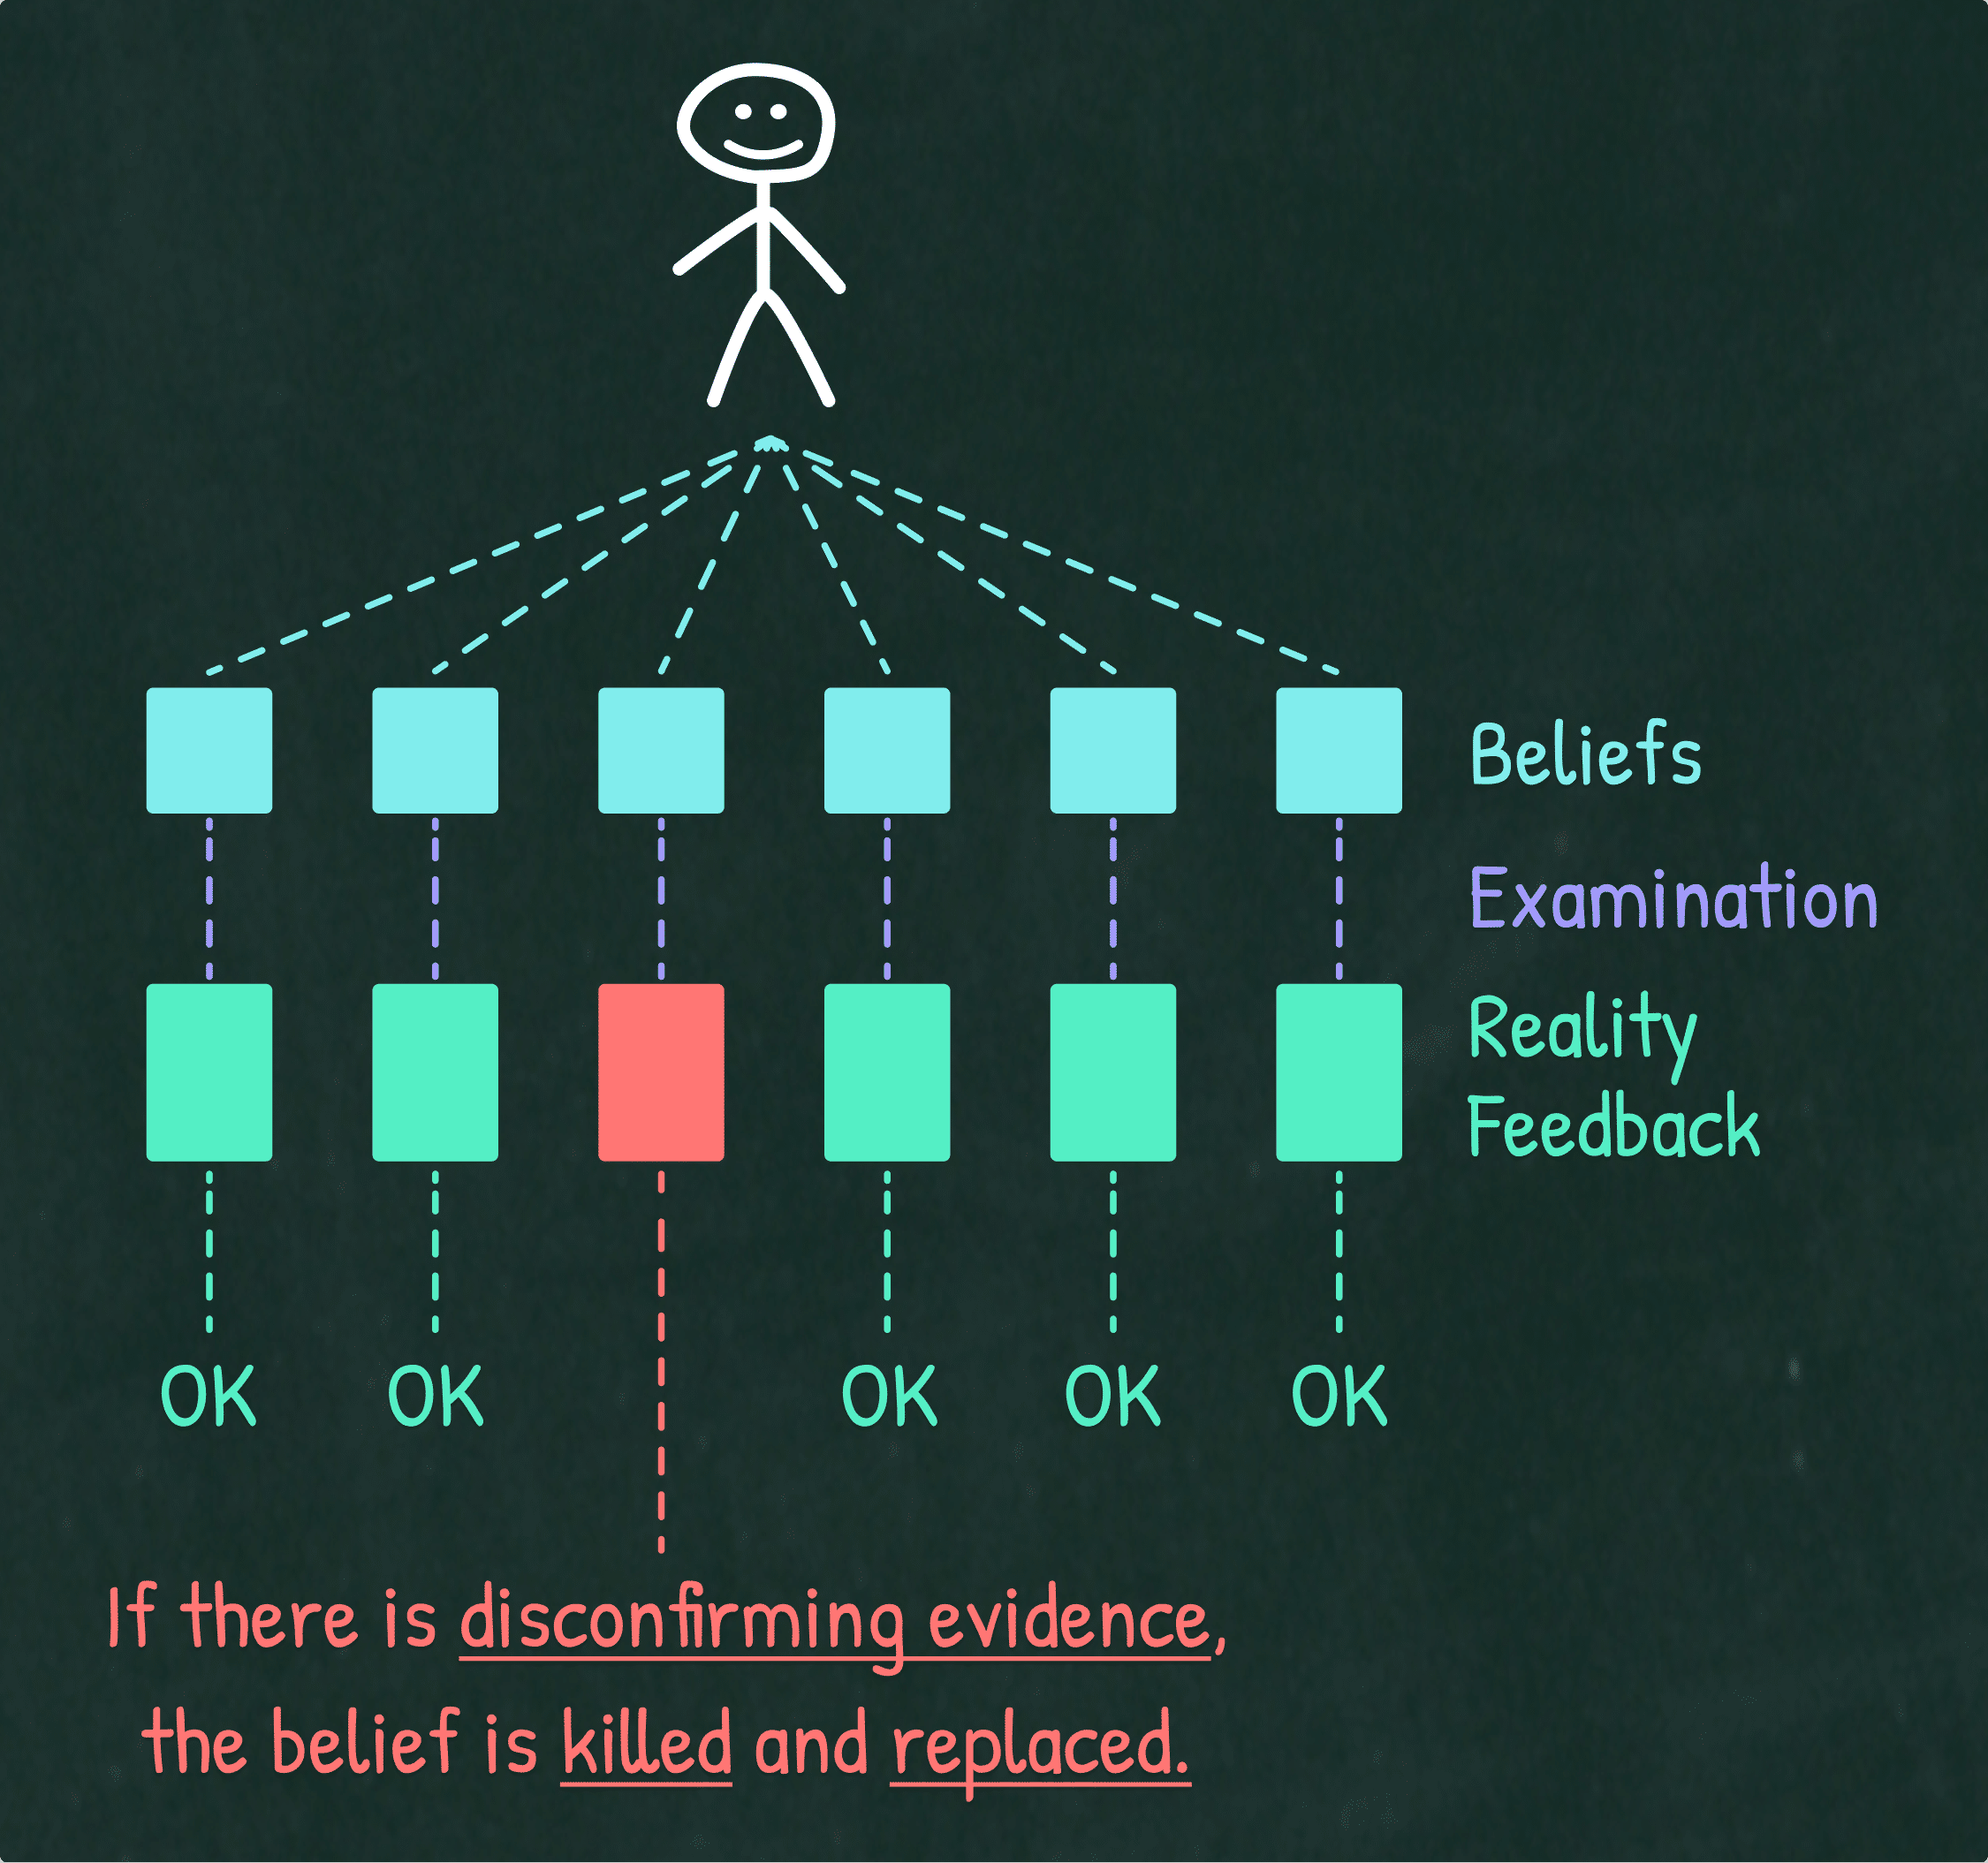 Illustration showing how examination of beliefs allows us to remove beliefs and opinions that are not true.